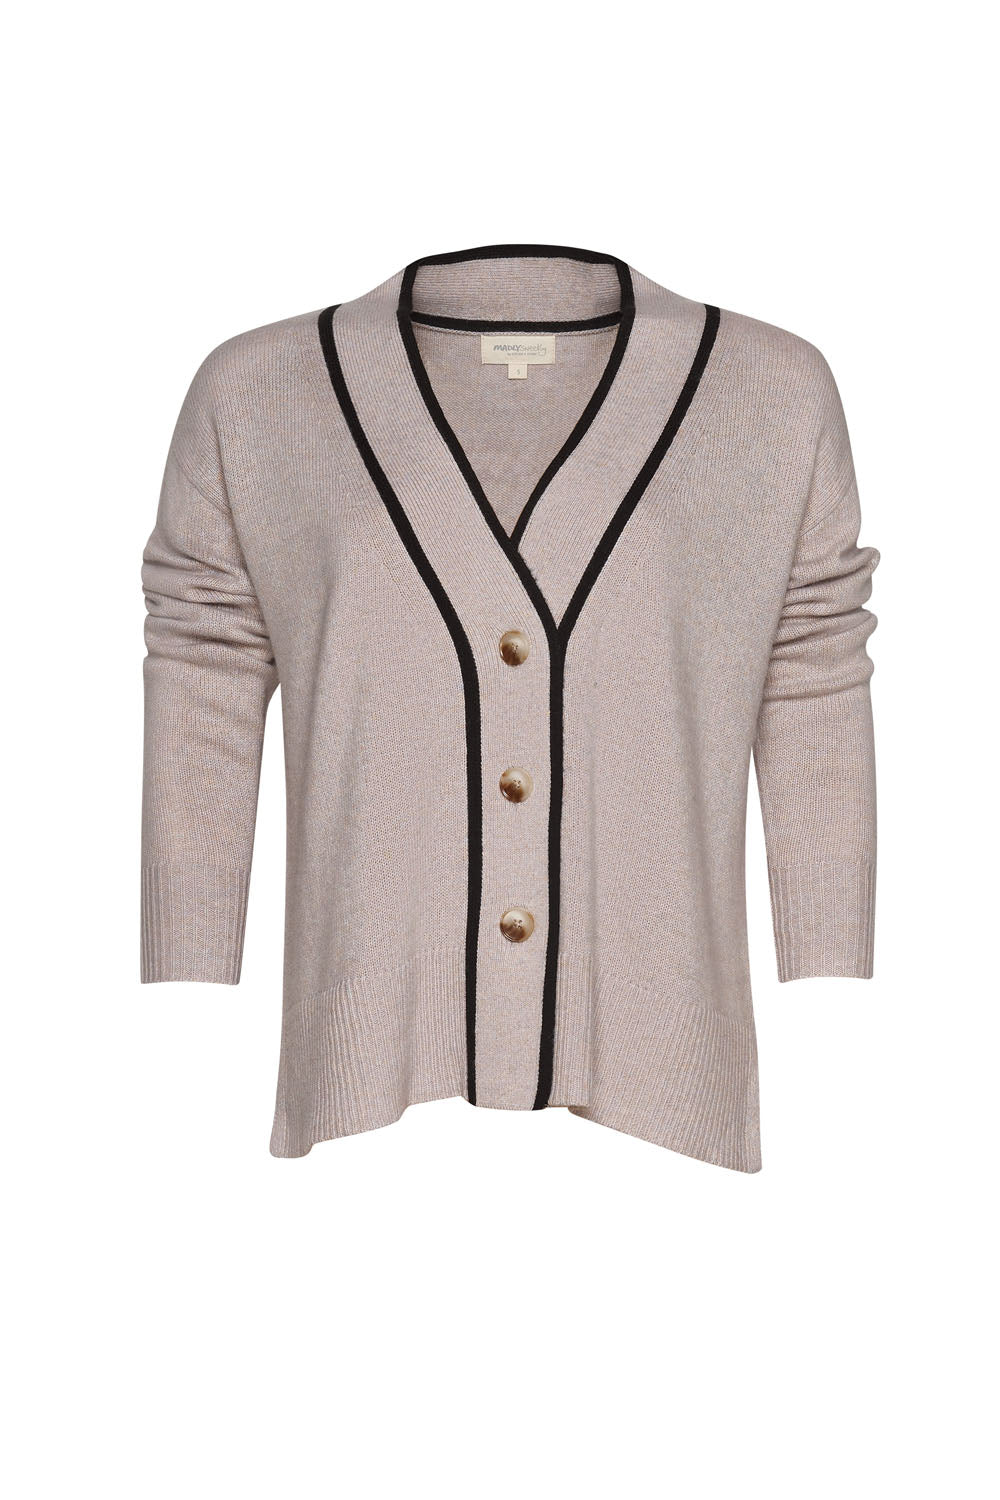 MADLY SWEETLY GIRLS CLUB CARDI - MARBLE - THE VOGUE STORE